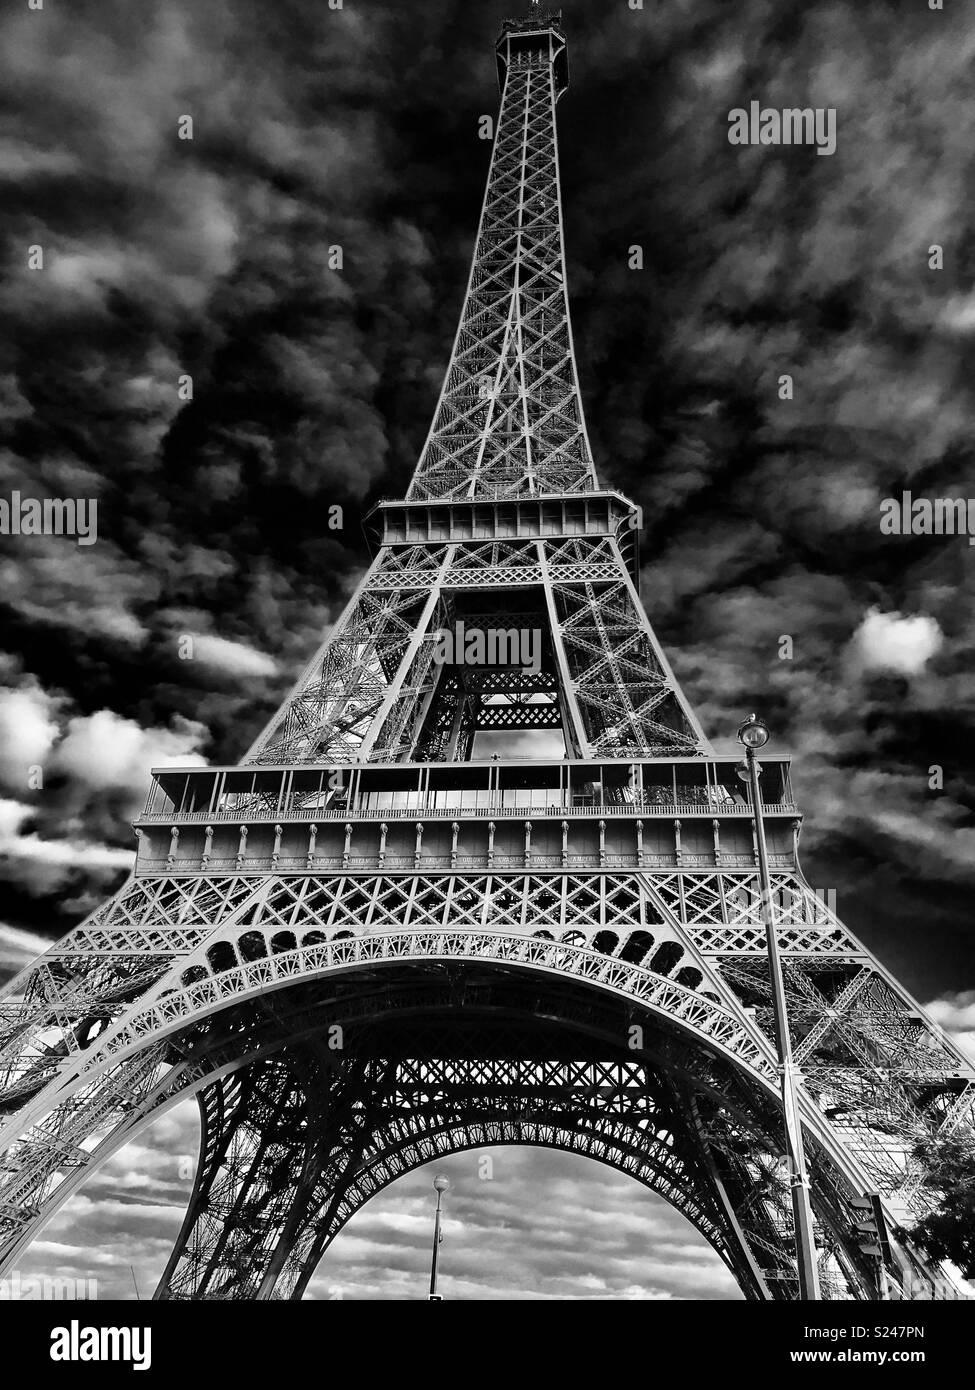 Eiffel Tower, Paris in black and white Stock Photo